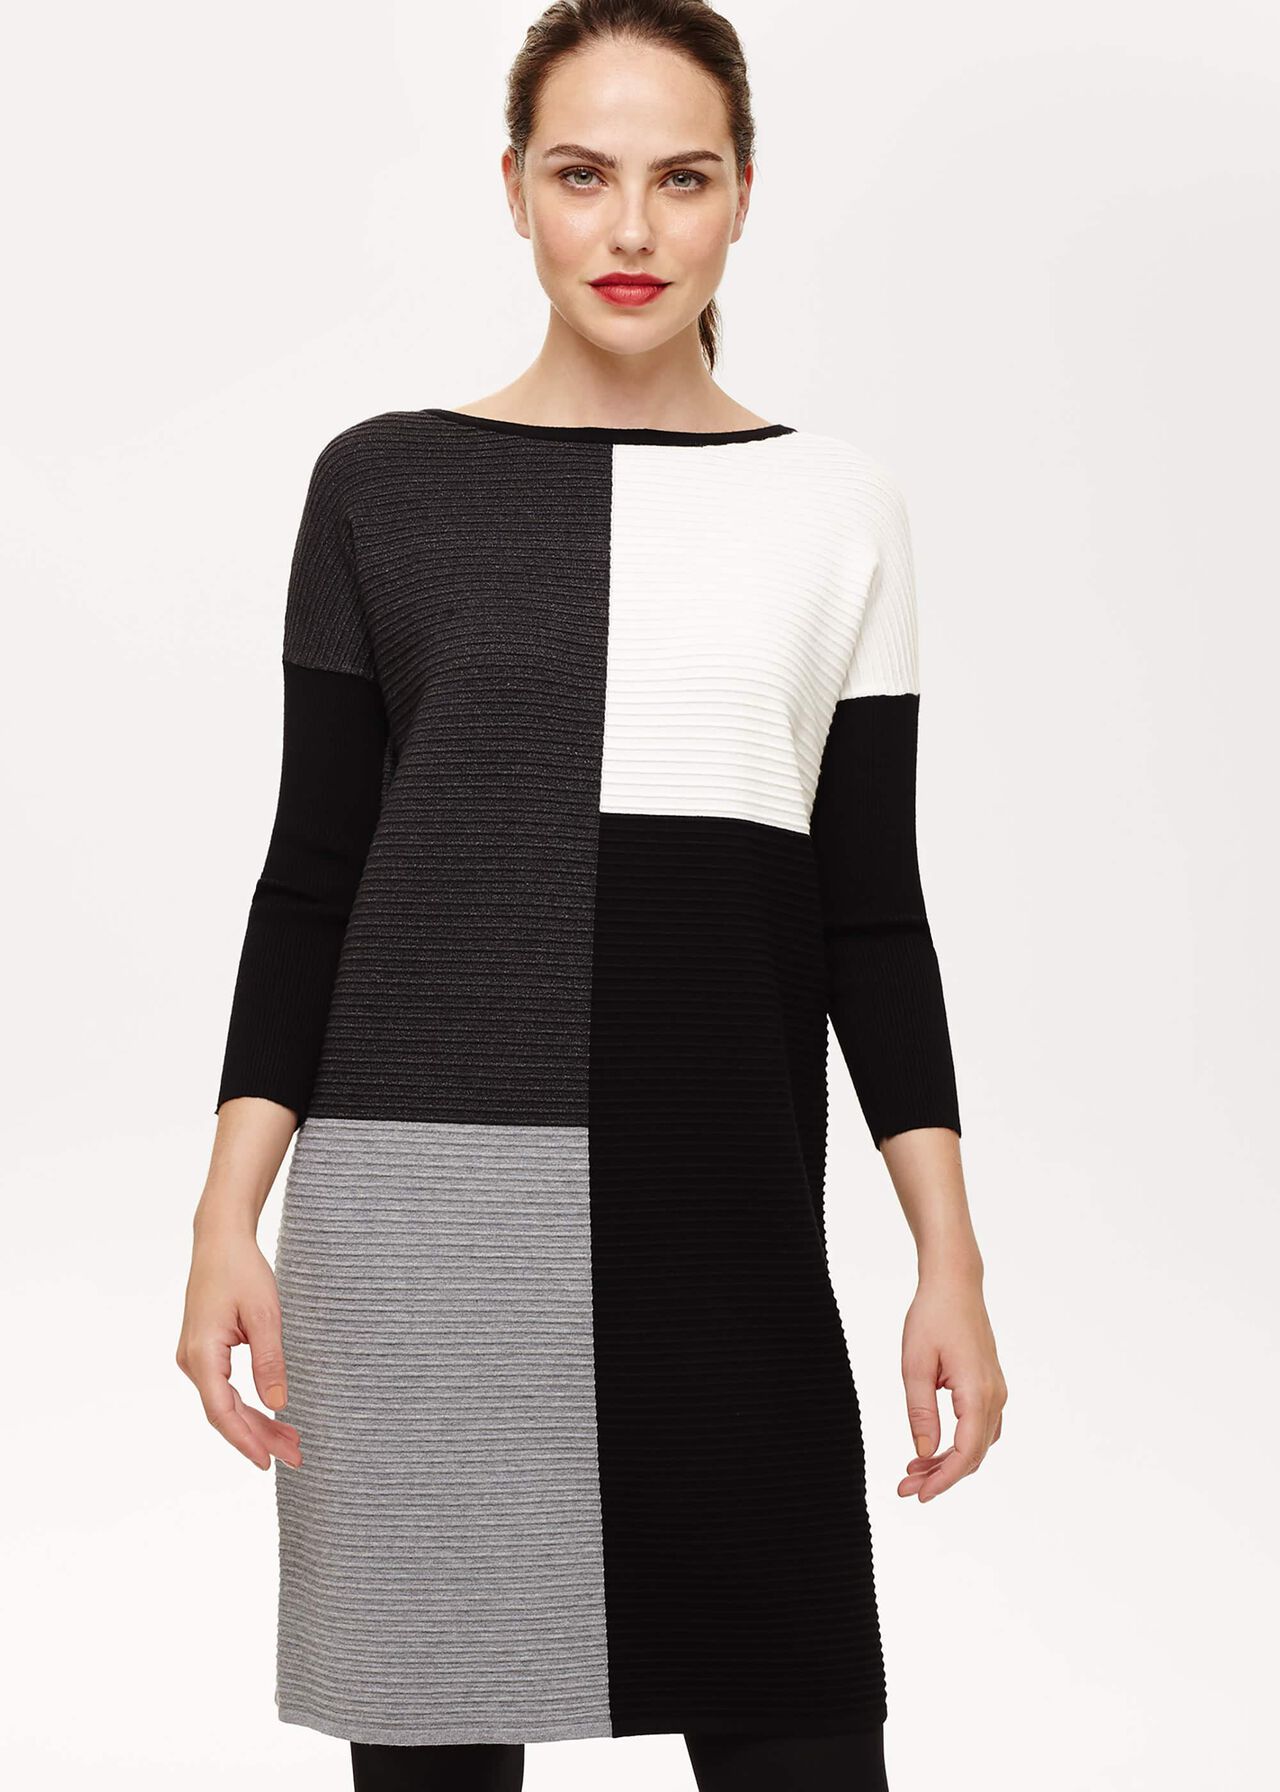 Cher Colour Block Knitted Dress